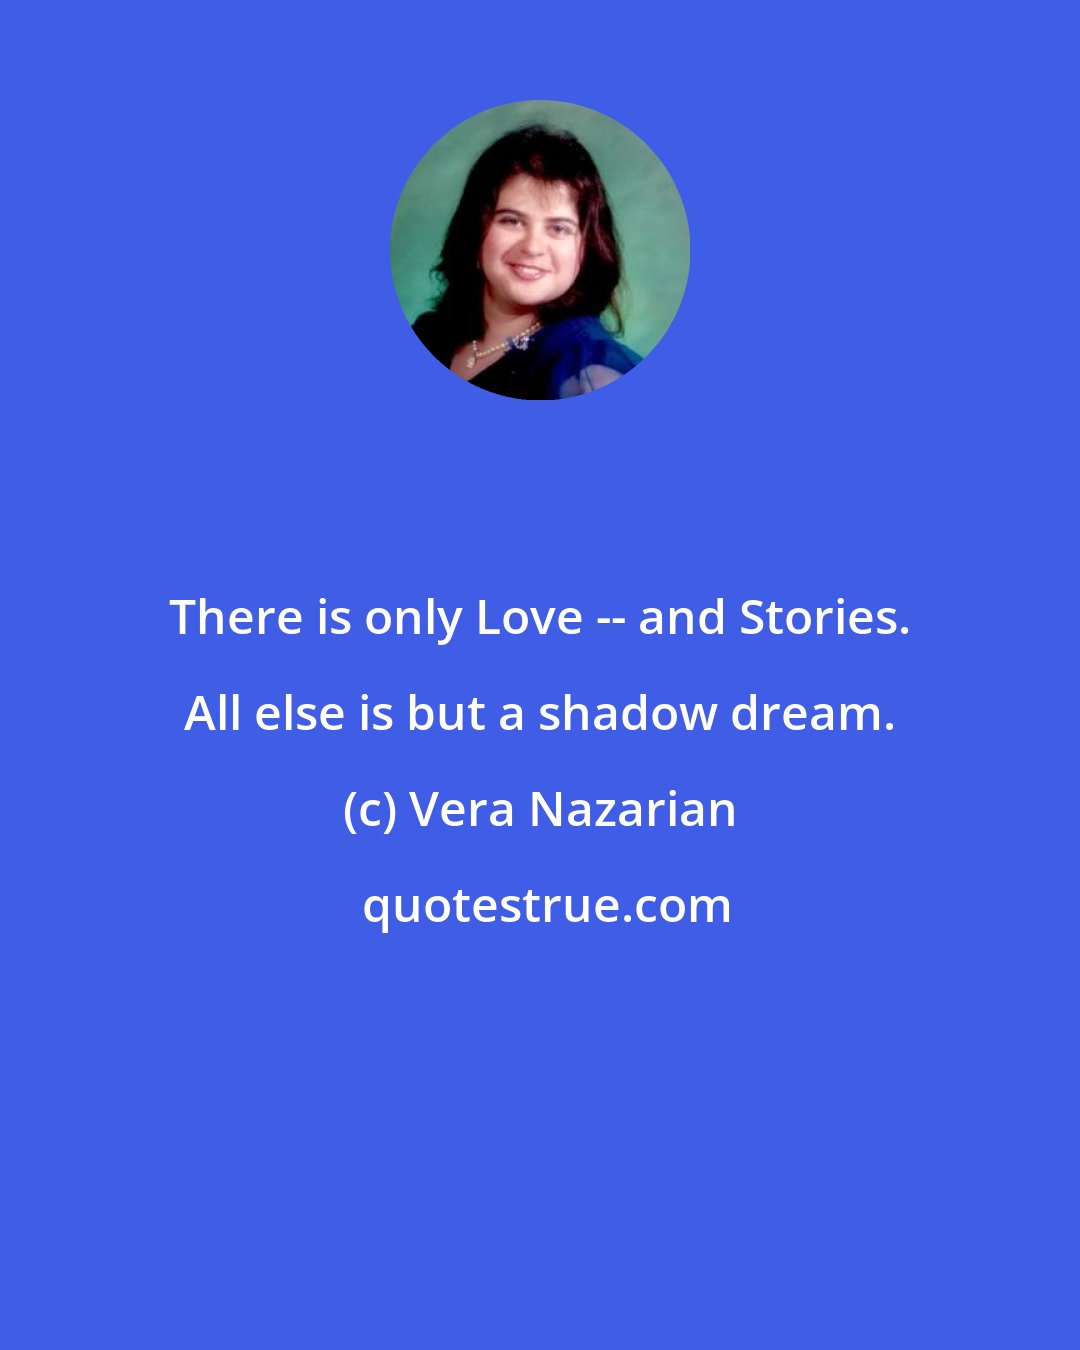 Vera Nazarian: There is only Love -- and Stories. All else is but a shadow dream.